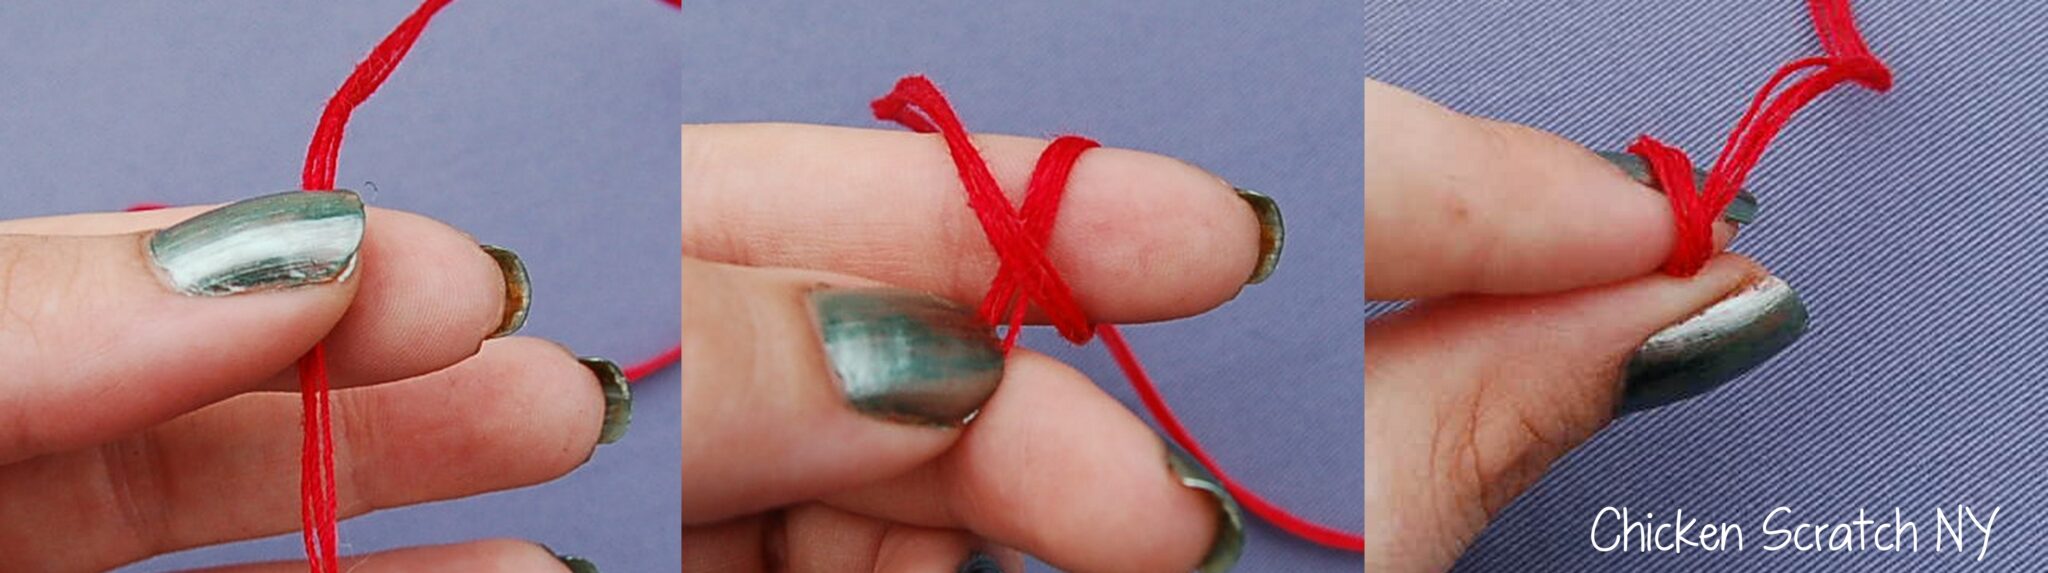 Keep Your Hand-Sewing Needle Threaded - Threads